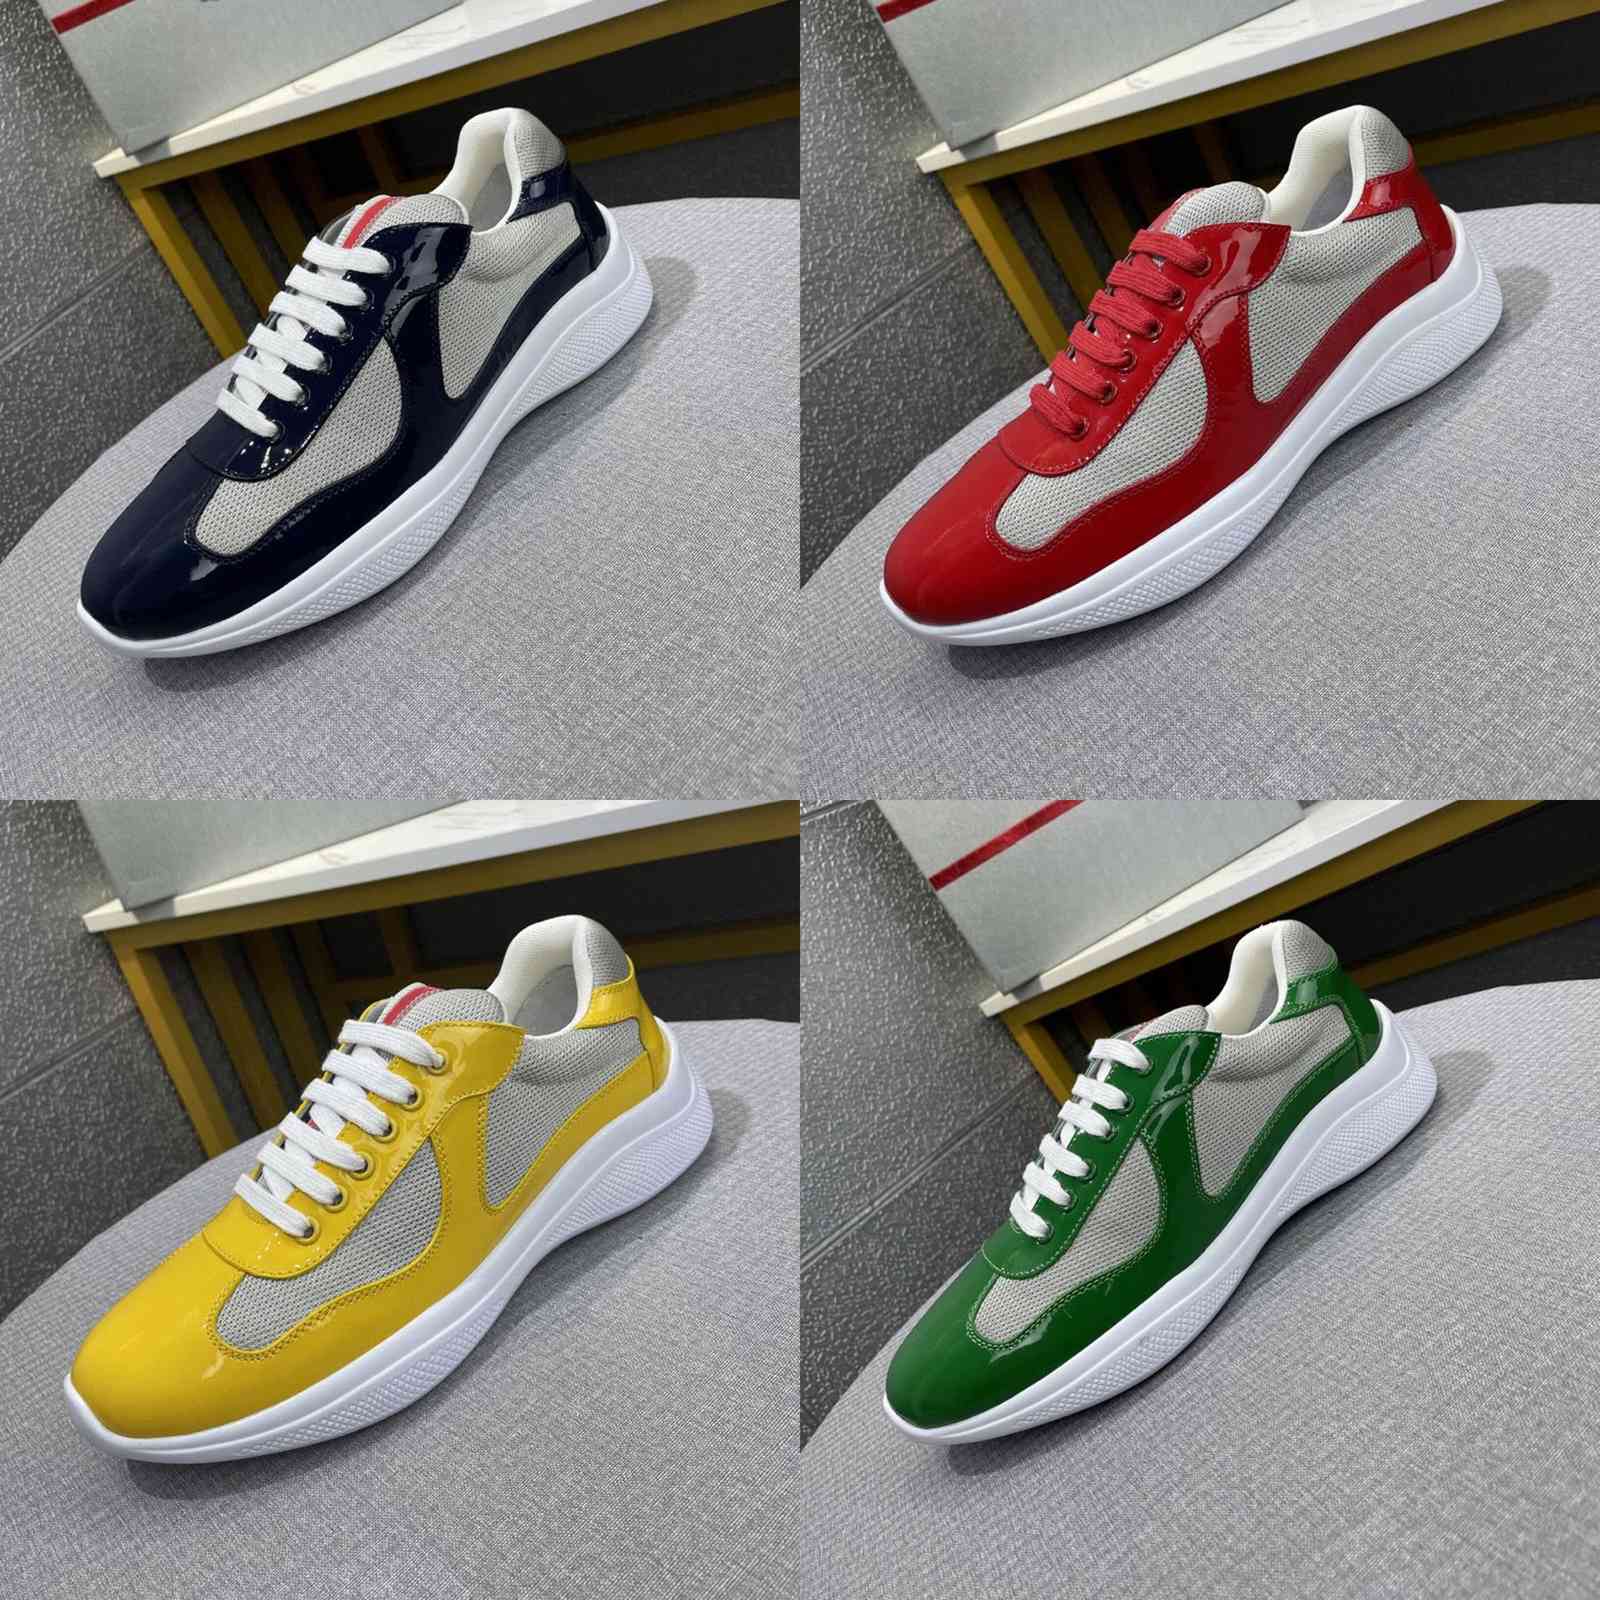 

Casual Outdoor Up Bike Fabric With Patent Cup Shoes Red Yellow Green Mens Leather Lace Box Runner Trainers America's Designer Shoe Fkip, Men us5=uk4.5=eu38